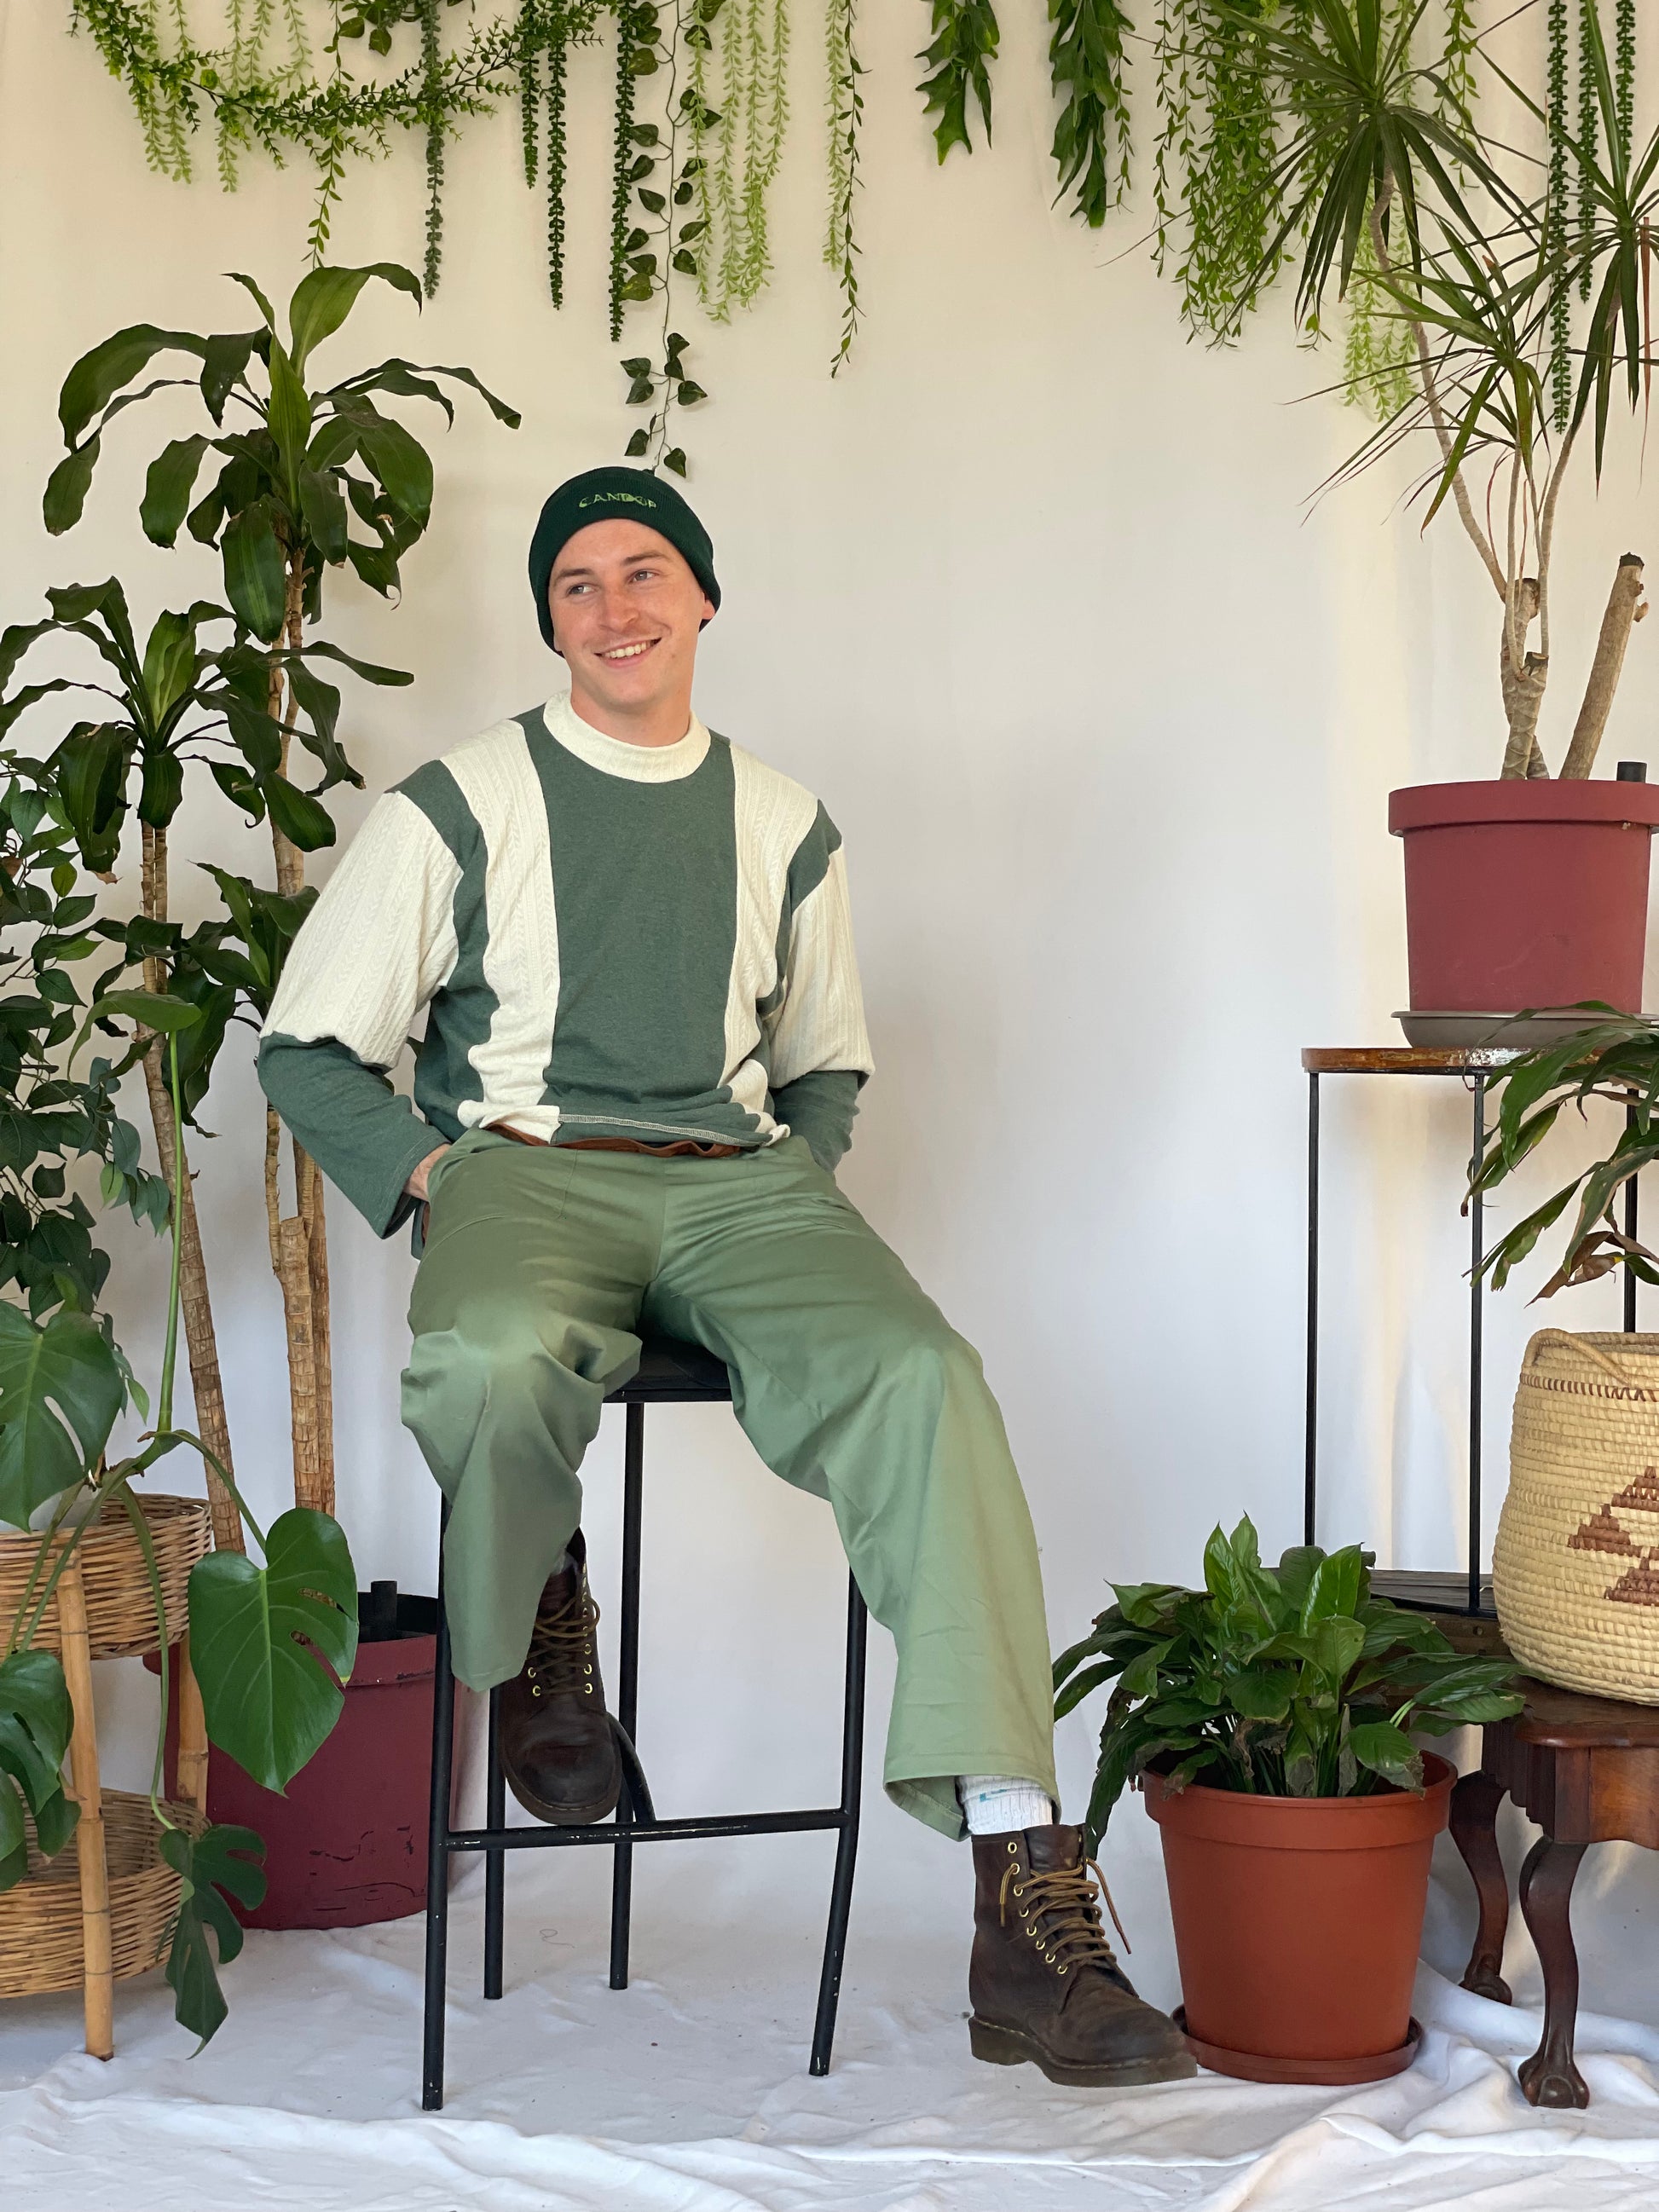 Model wears green pants with a striped jersey and green beanie. Model sits against a white backdrop with plants and hanging foliage.